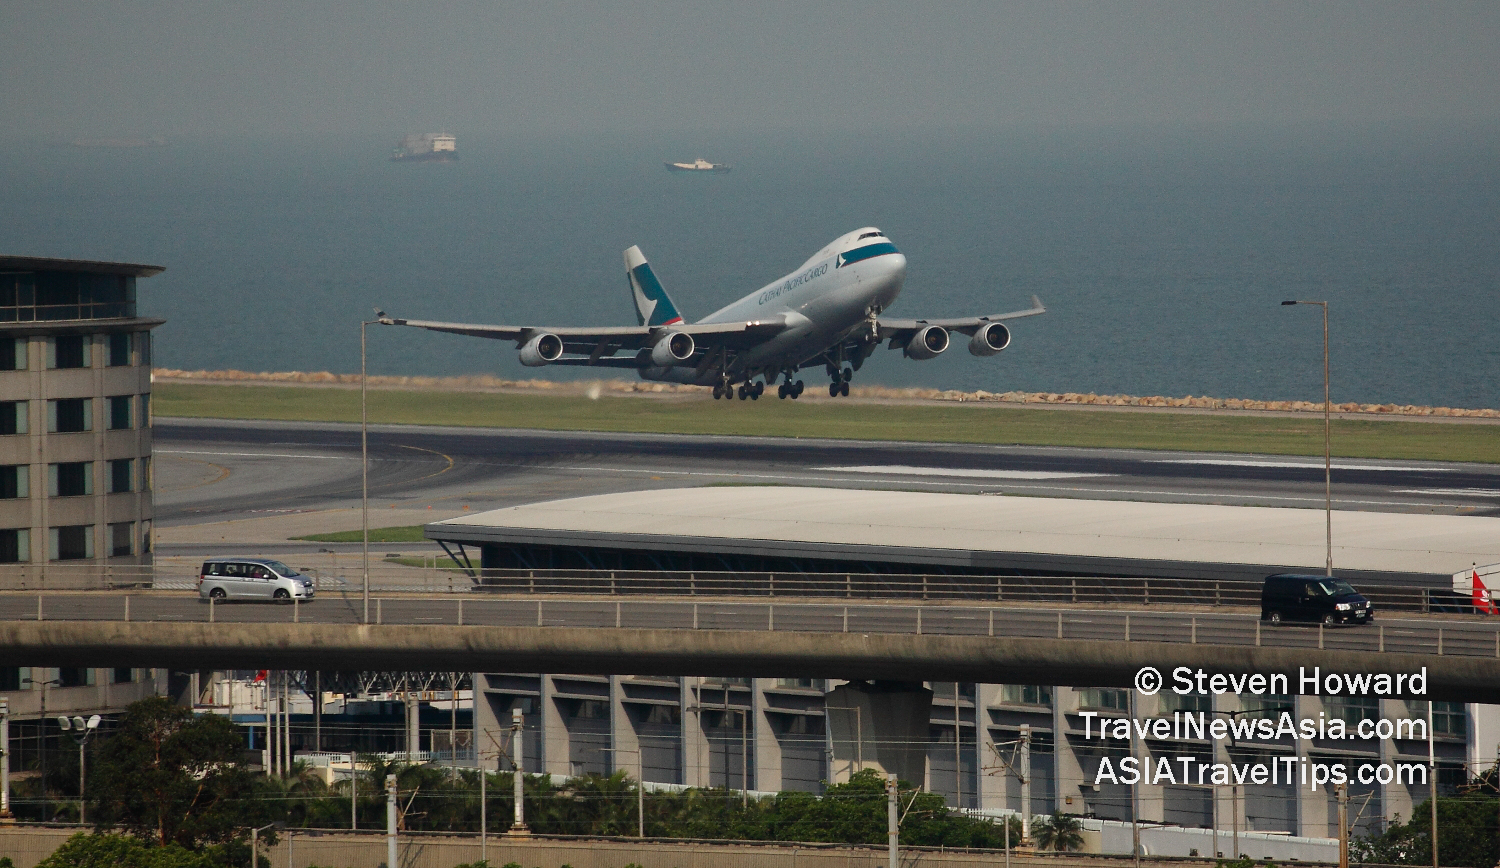 Cathay Pacific Boeing 747F takes off from Hong Kong International Airport (HKIA). Picture by Steven Howard of TravelNewsAsia.com Click to enlarge.